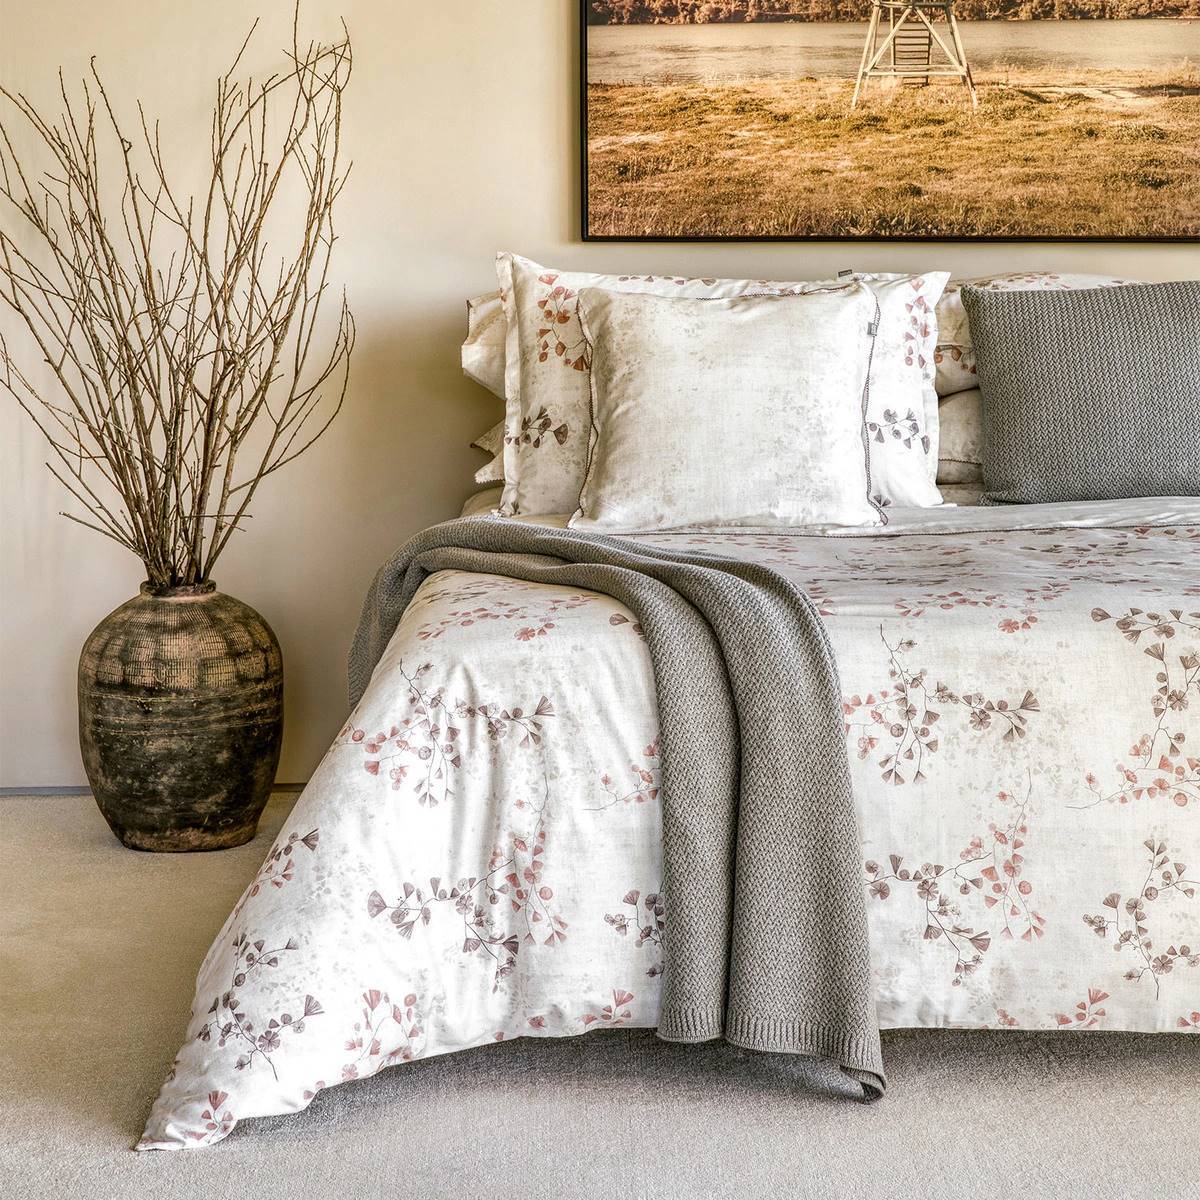 The Spring Trends For Your SpringInspired Bedding